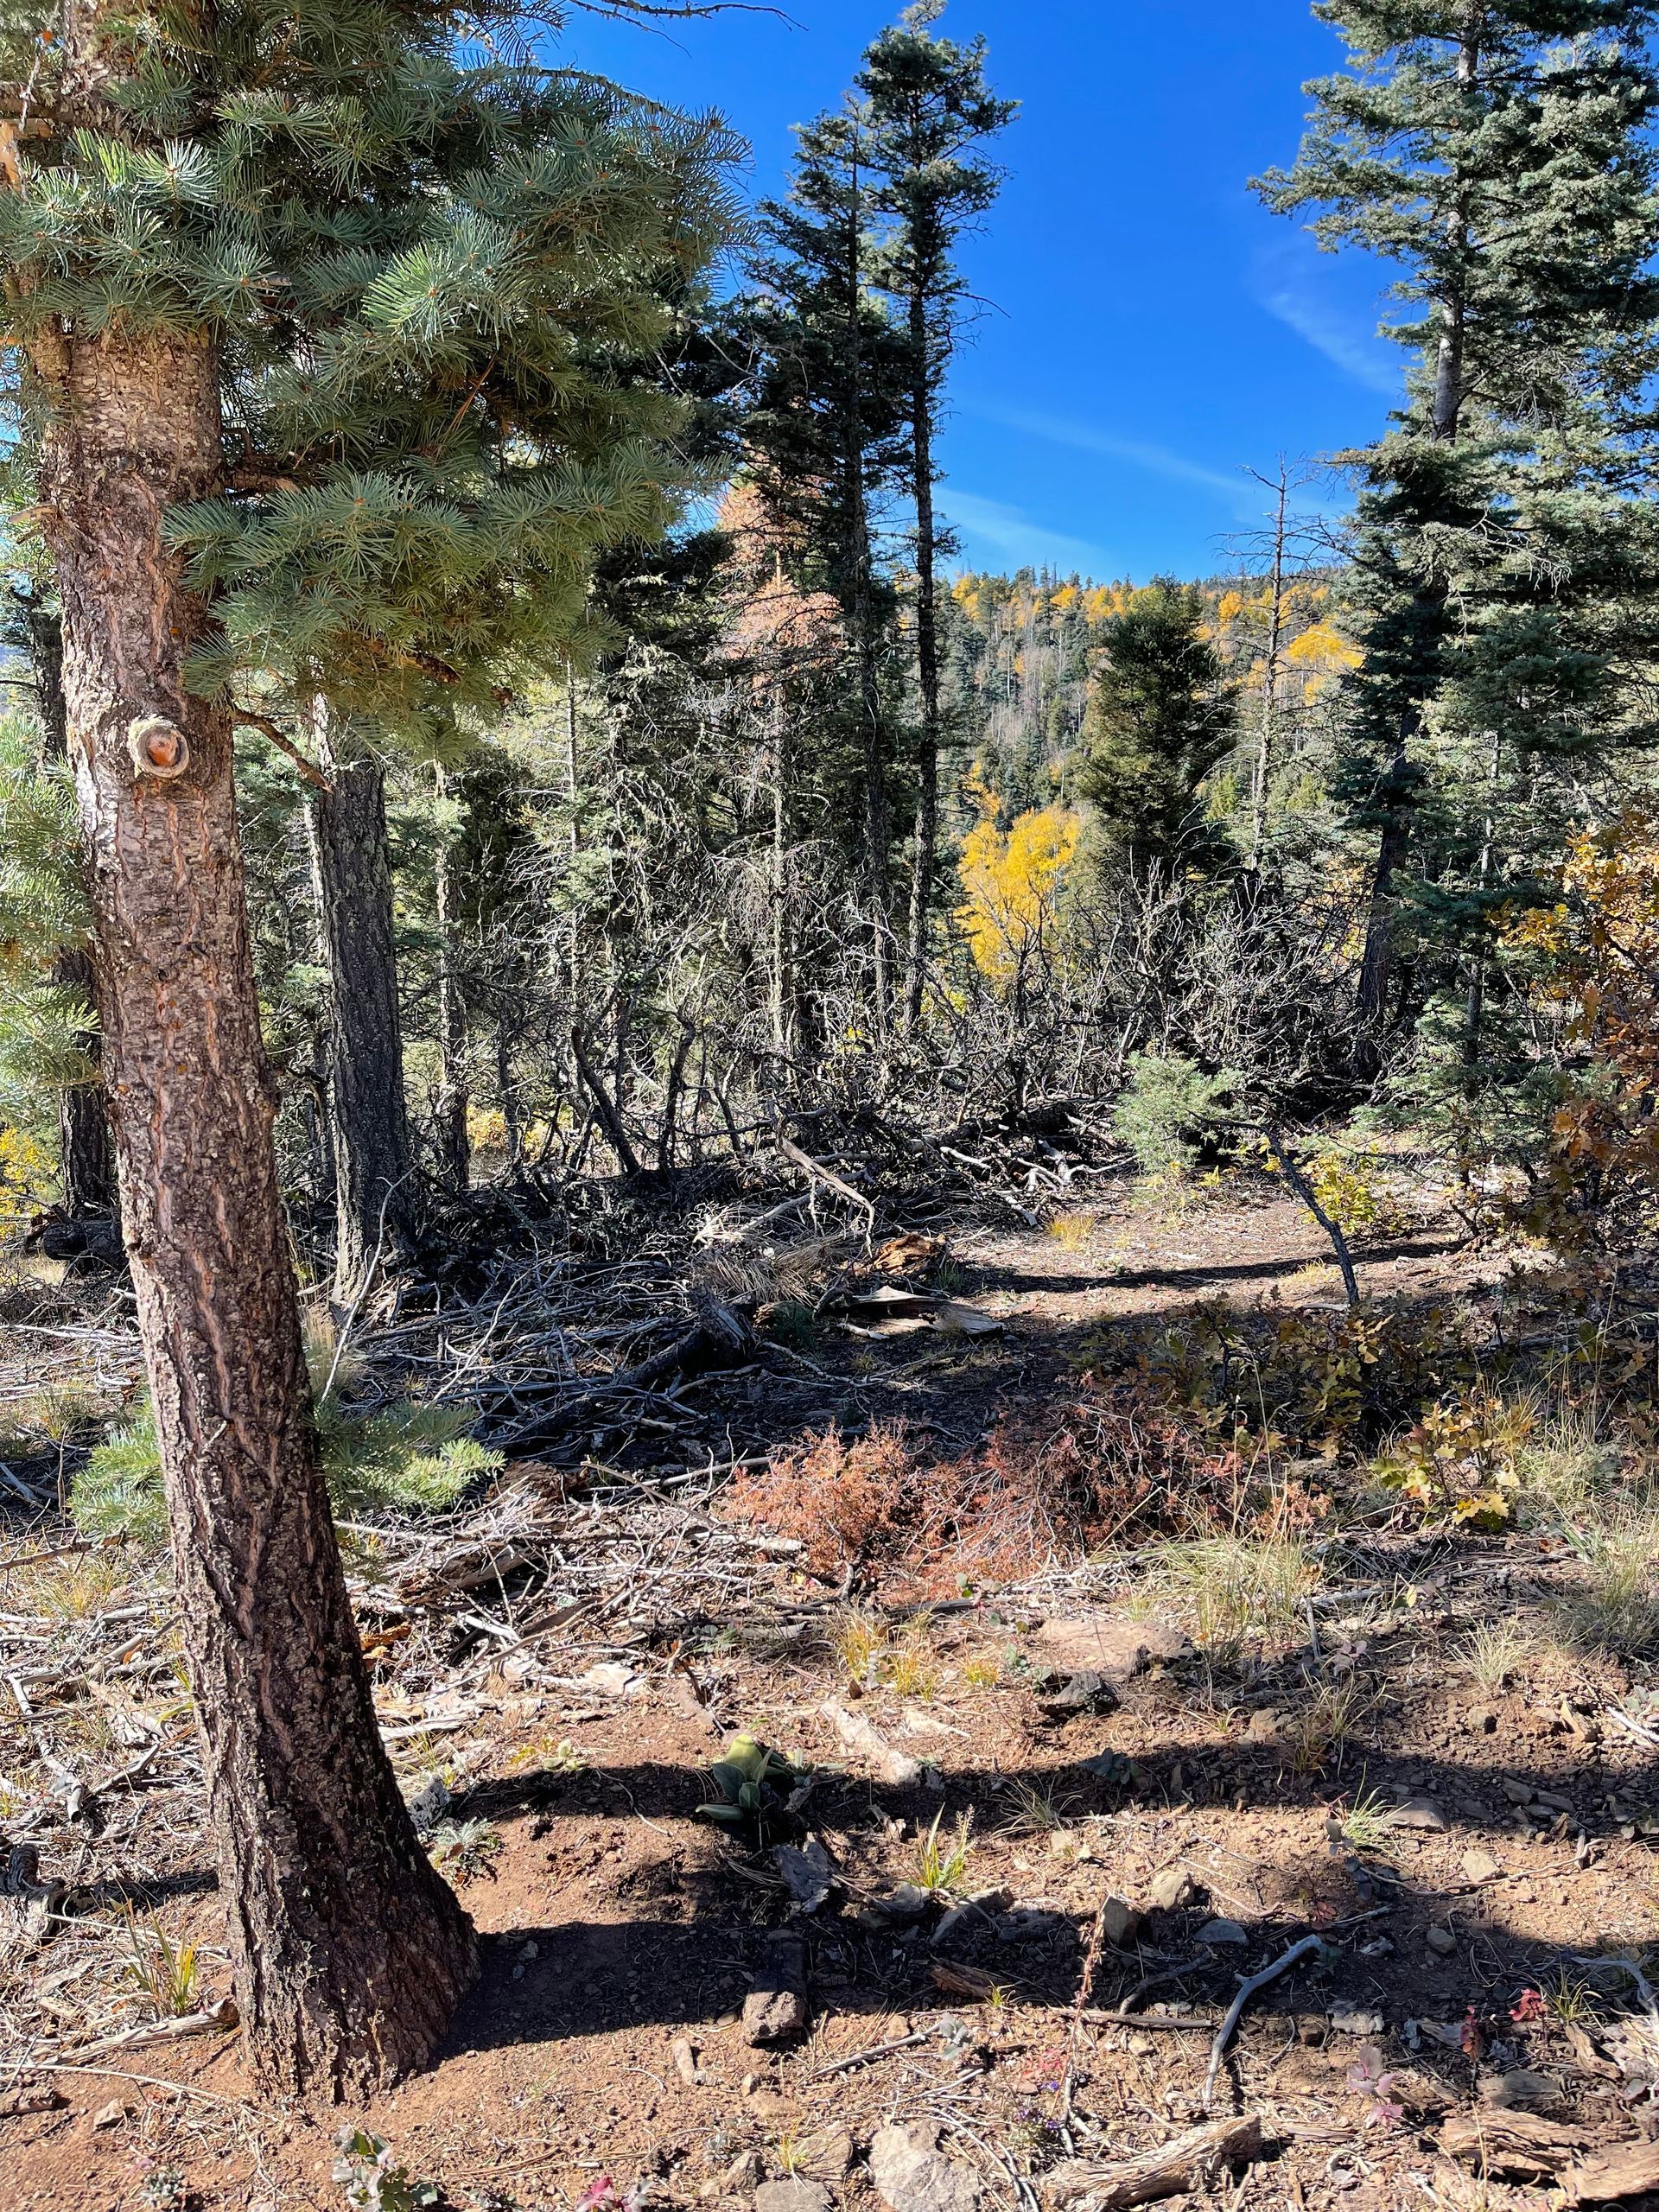 Forest filled with dead tree branches and limbs from before Taos Tree came .